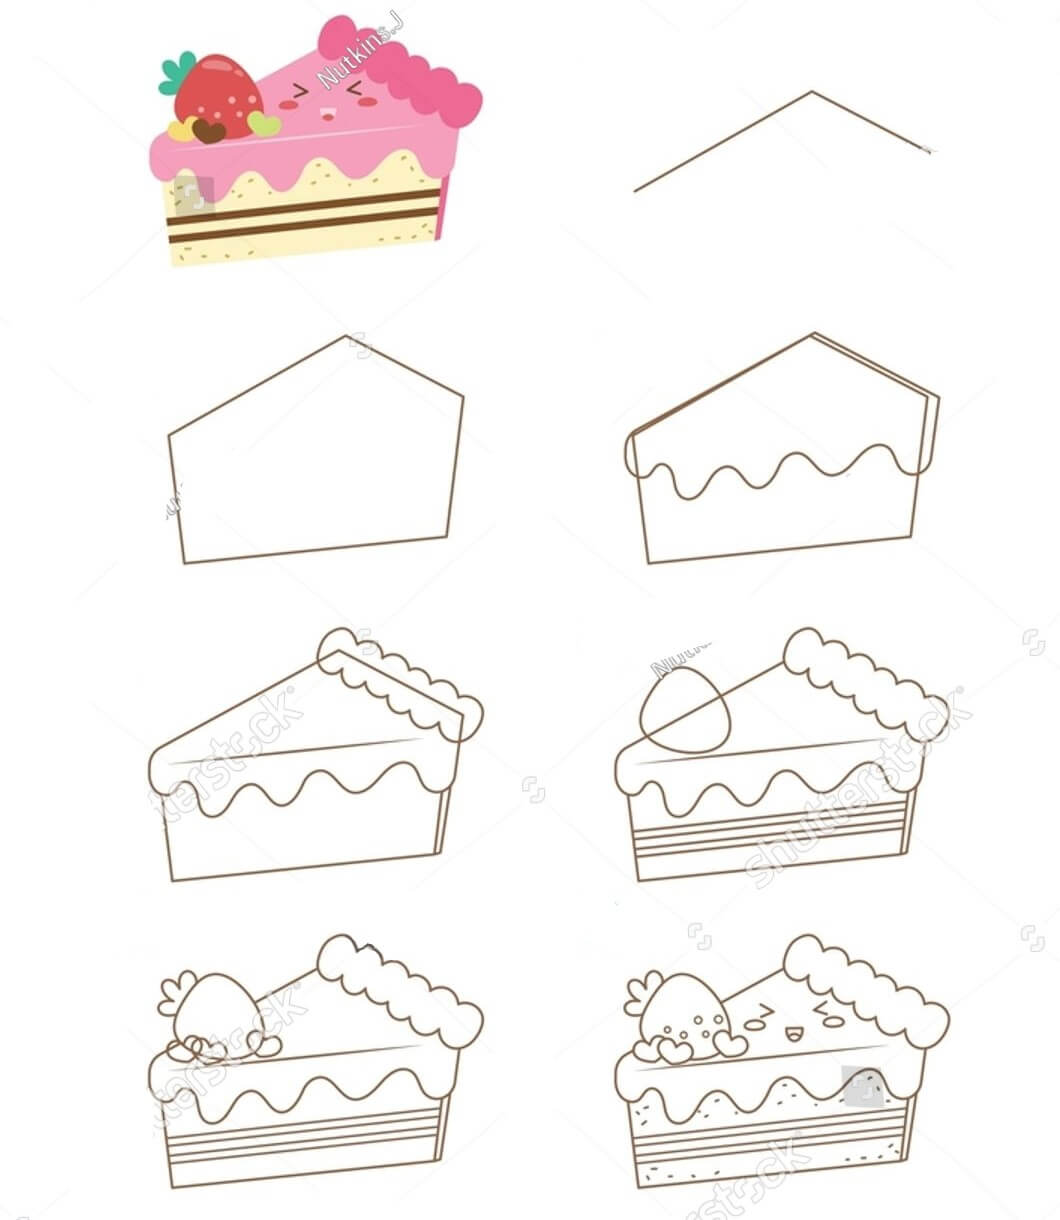 How to draw Simple cake drawing